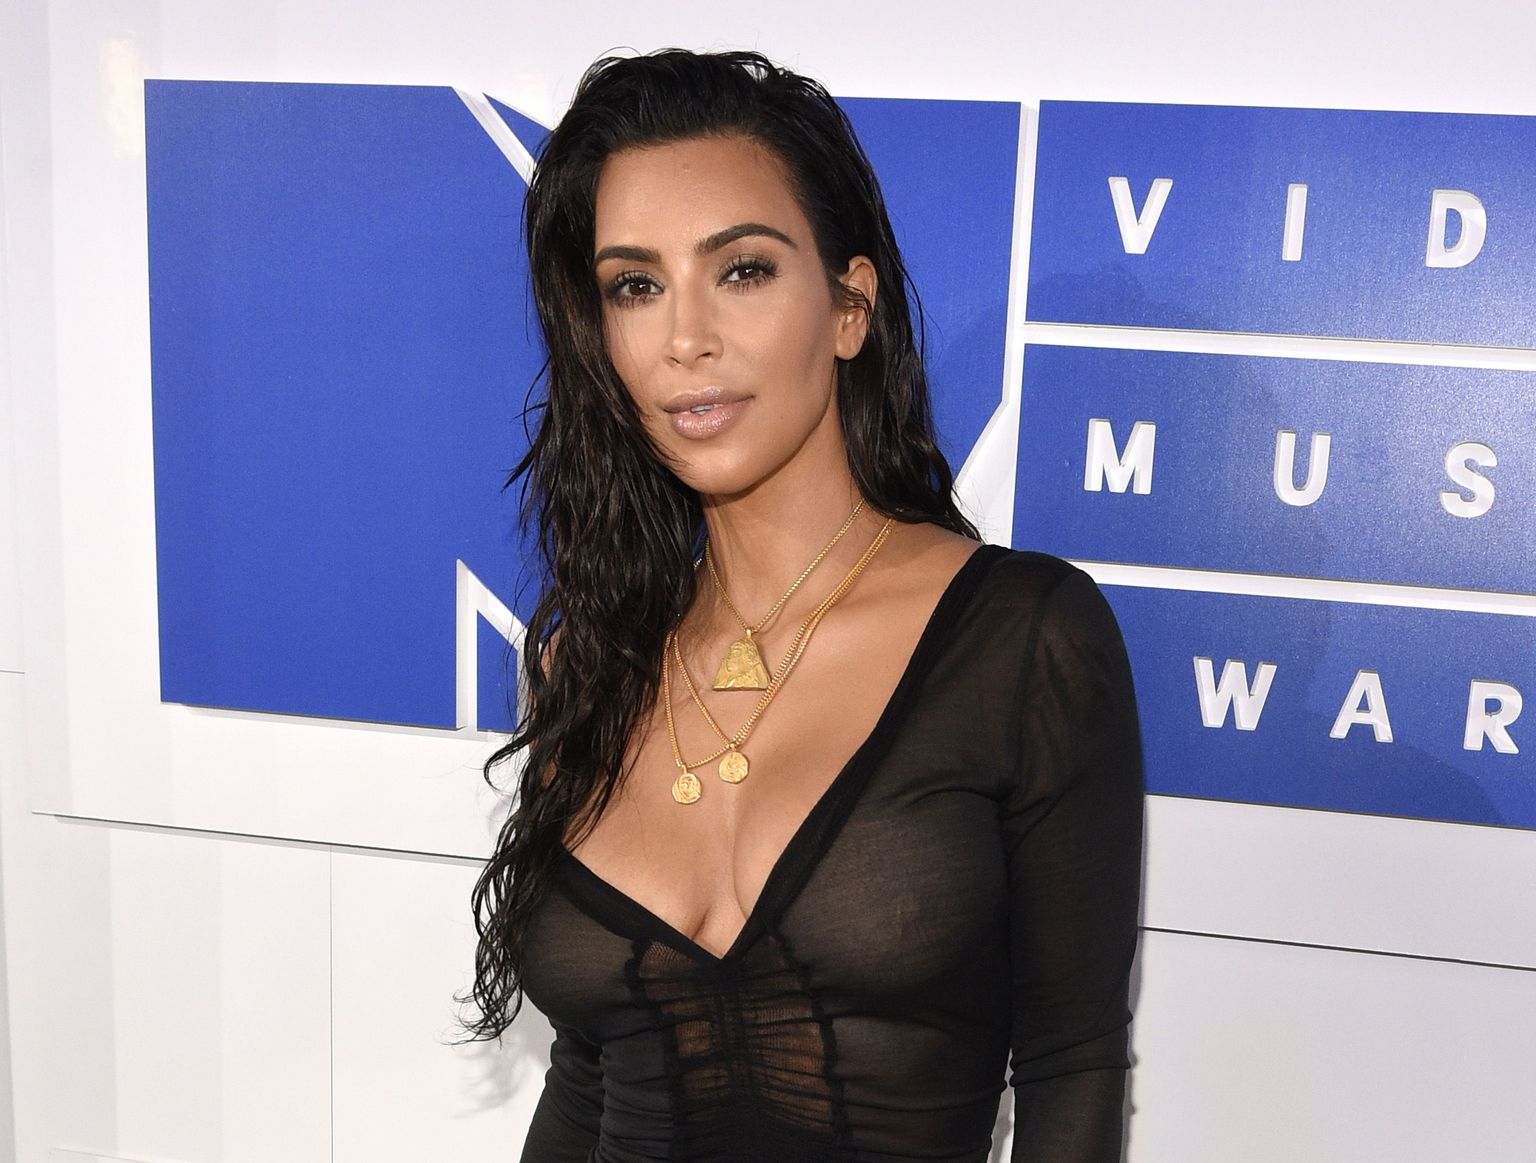 FILE - In this Aug. 28, 2016 file photo, Kim Kardashian West arrives at the MTV Video Music Awards in New York. Kardashian West is suing online media outlet, MediaTakeOut.com, saying she was wrongly portrayed as a liar and thief after she was attacked in Paris. Police say armed robbers forced their way into a private residence where Kardashian West was staying on Oct. 3, tied her up and stole $10 million worth of jewelry. (Photo by Chris Pizzello/Invision/AP, File)